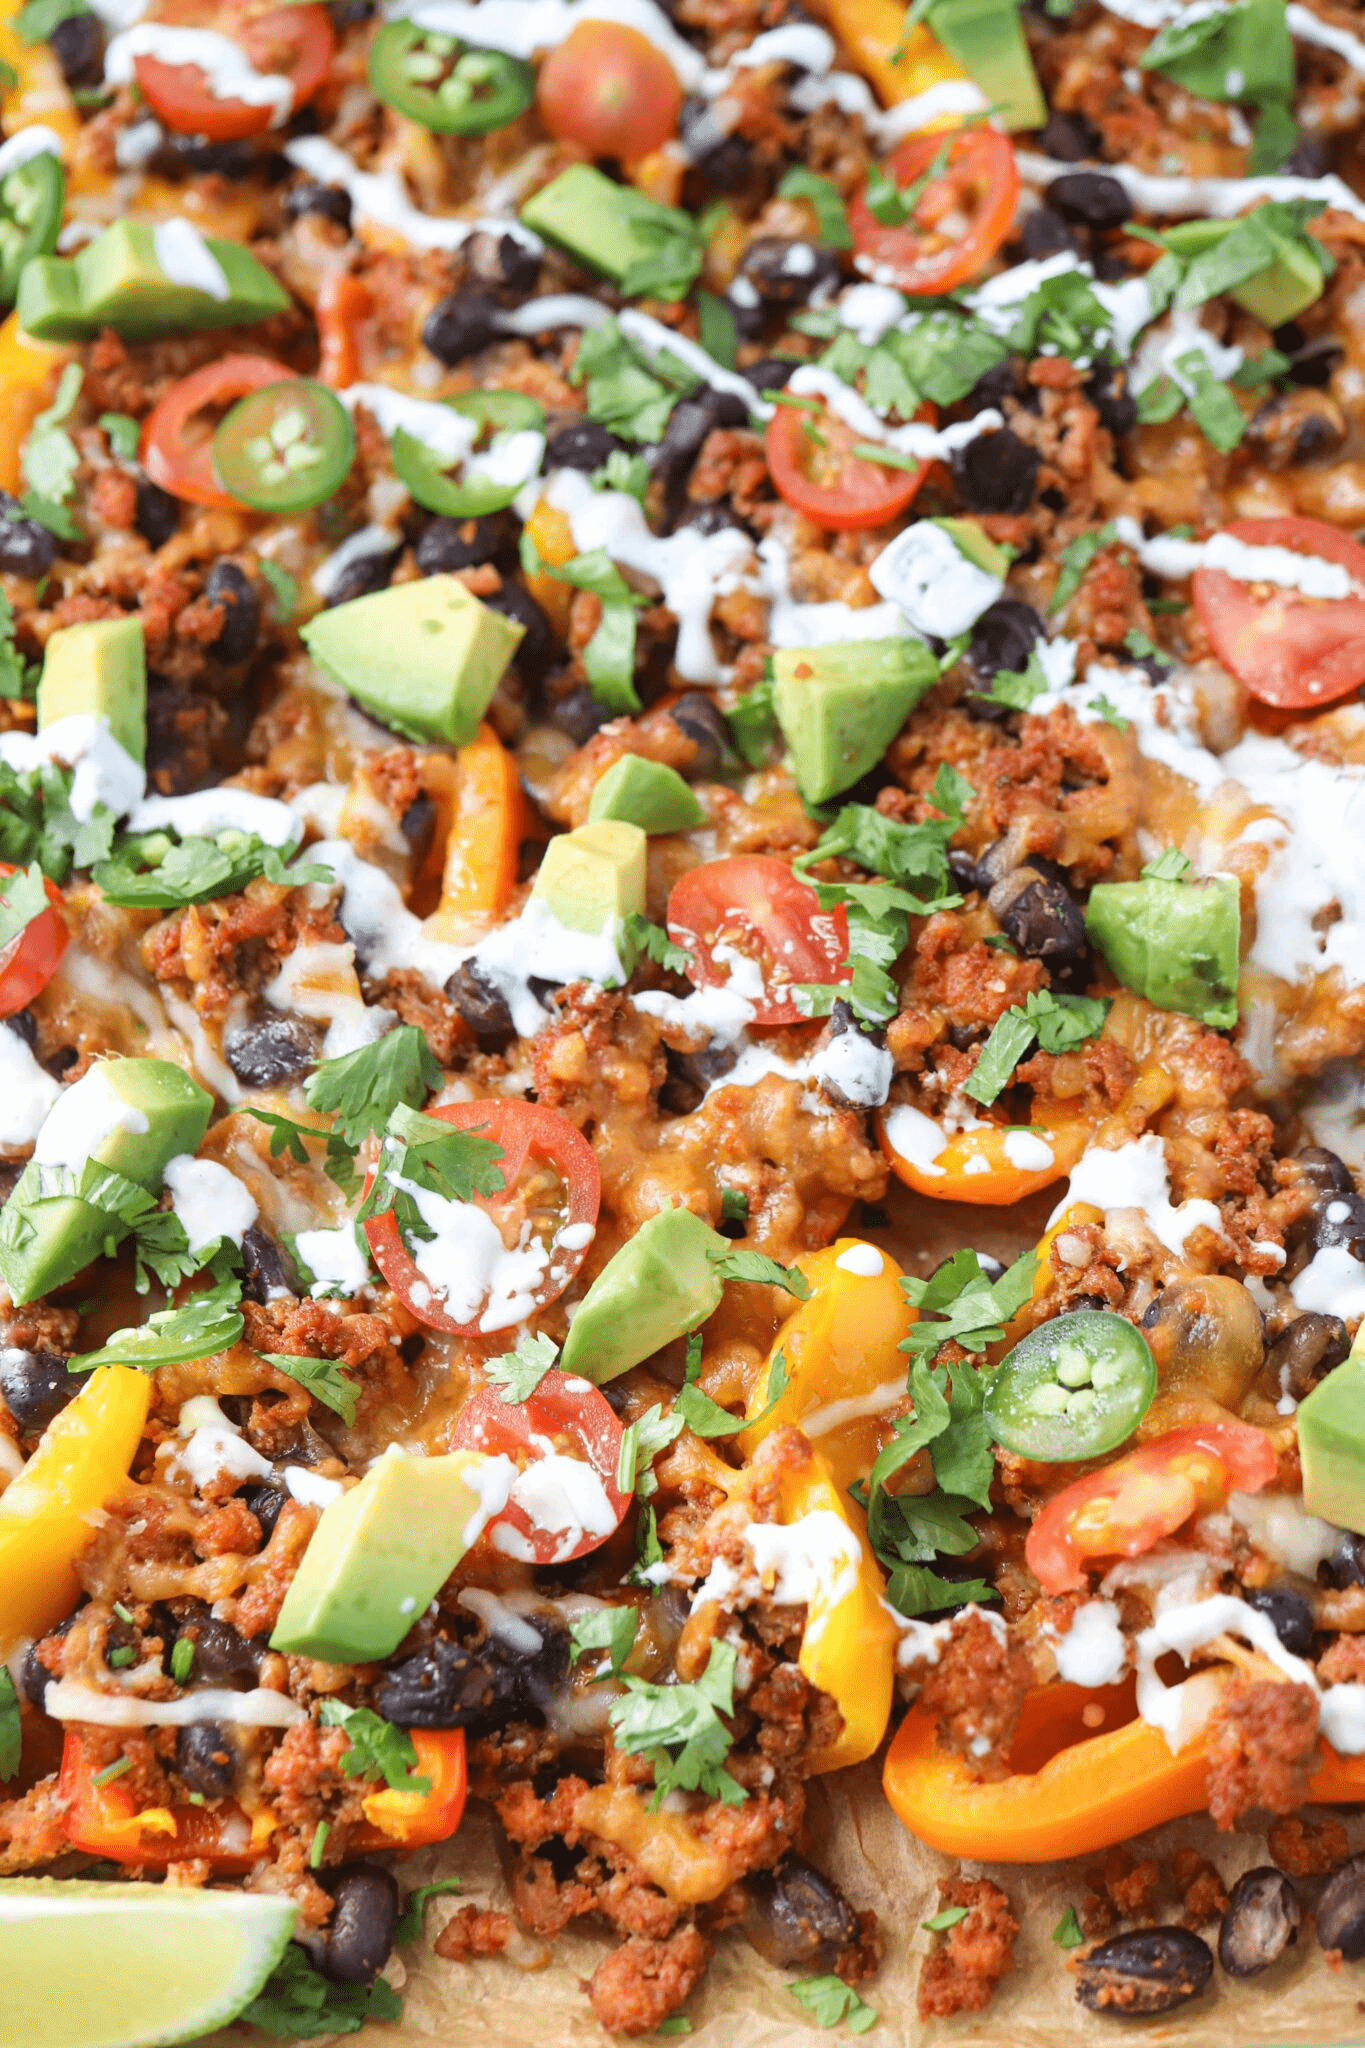 mini pepper nachos with ground meat, avocado and garnishes on teal baking tray.